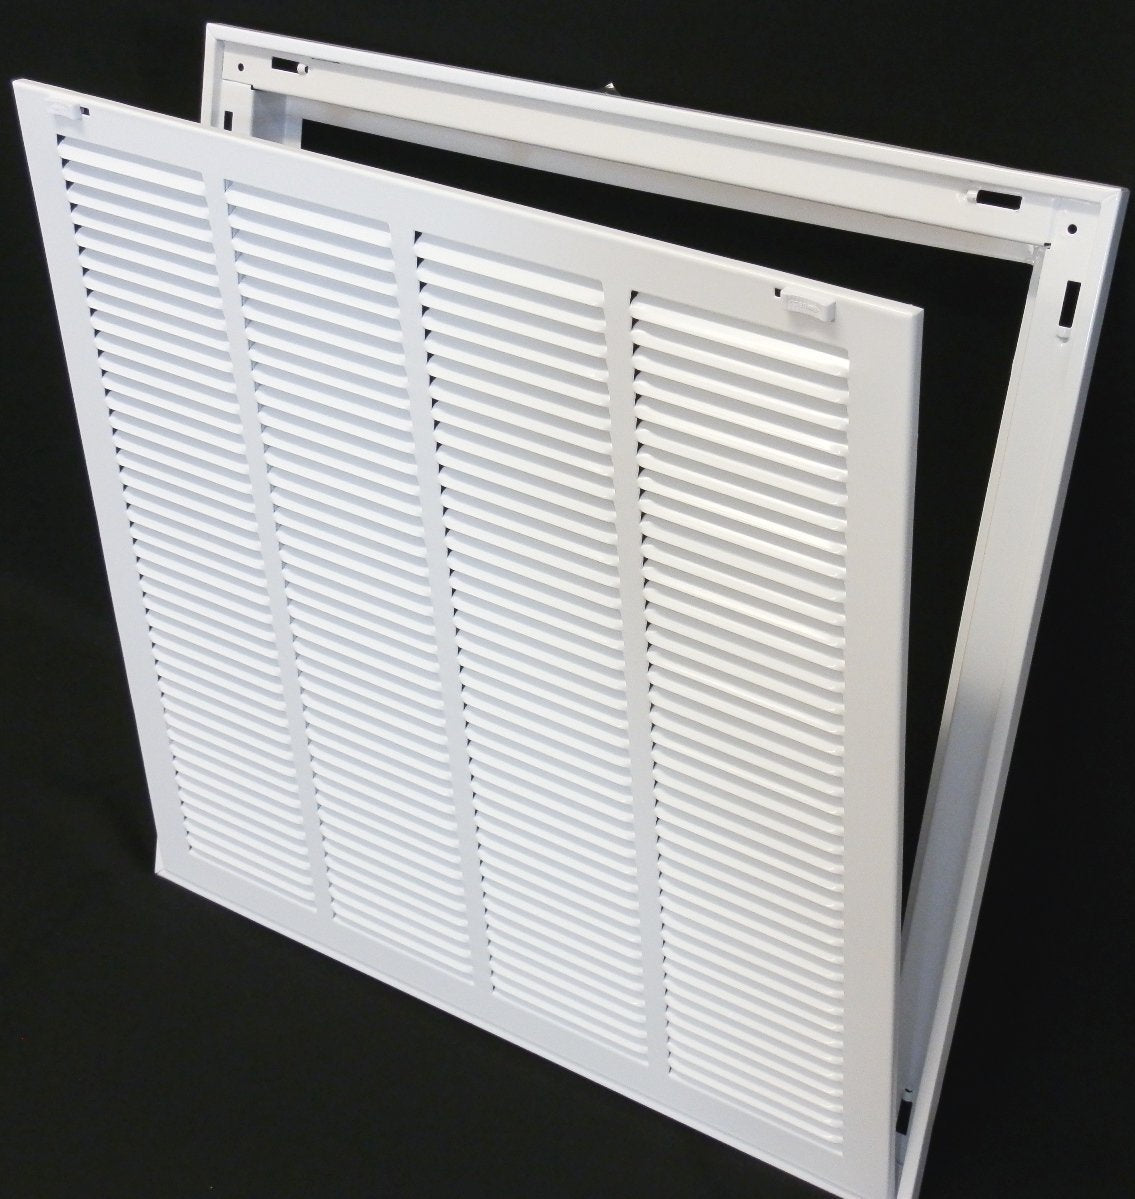 34&quot; X 20&quot; Steel Return Air Filter Grille for 1&quot; Filter - Removable Frame - [Outer Dimensions: 36 5/8&quot; X 22 5/8&quot;]